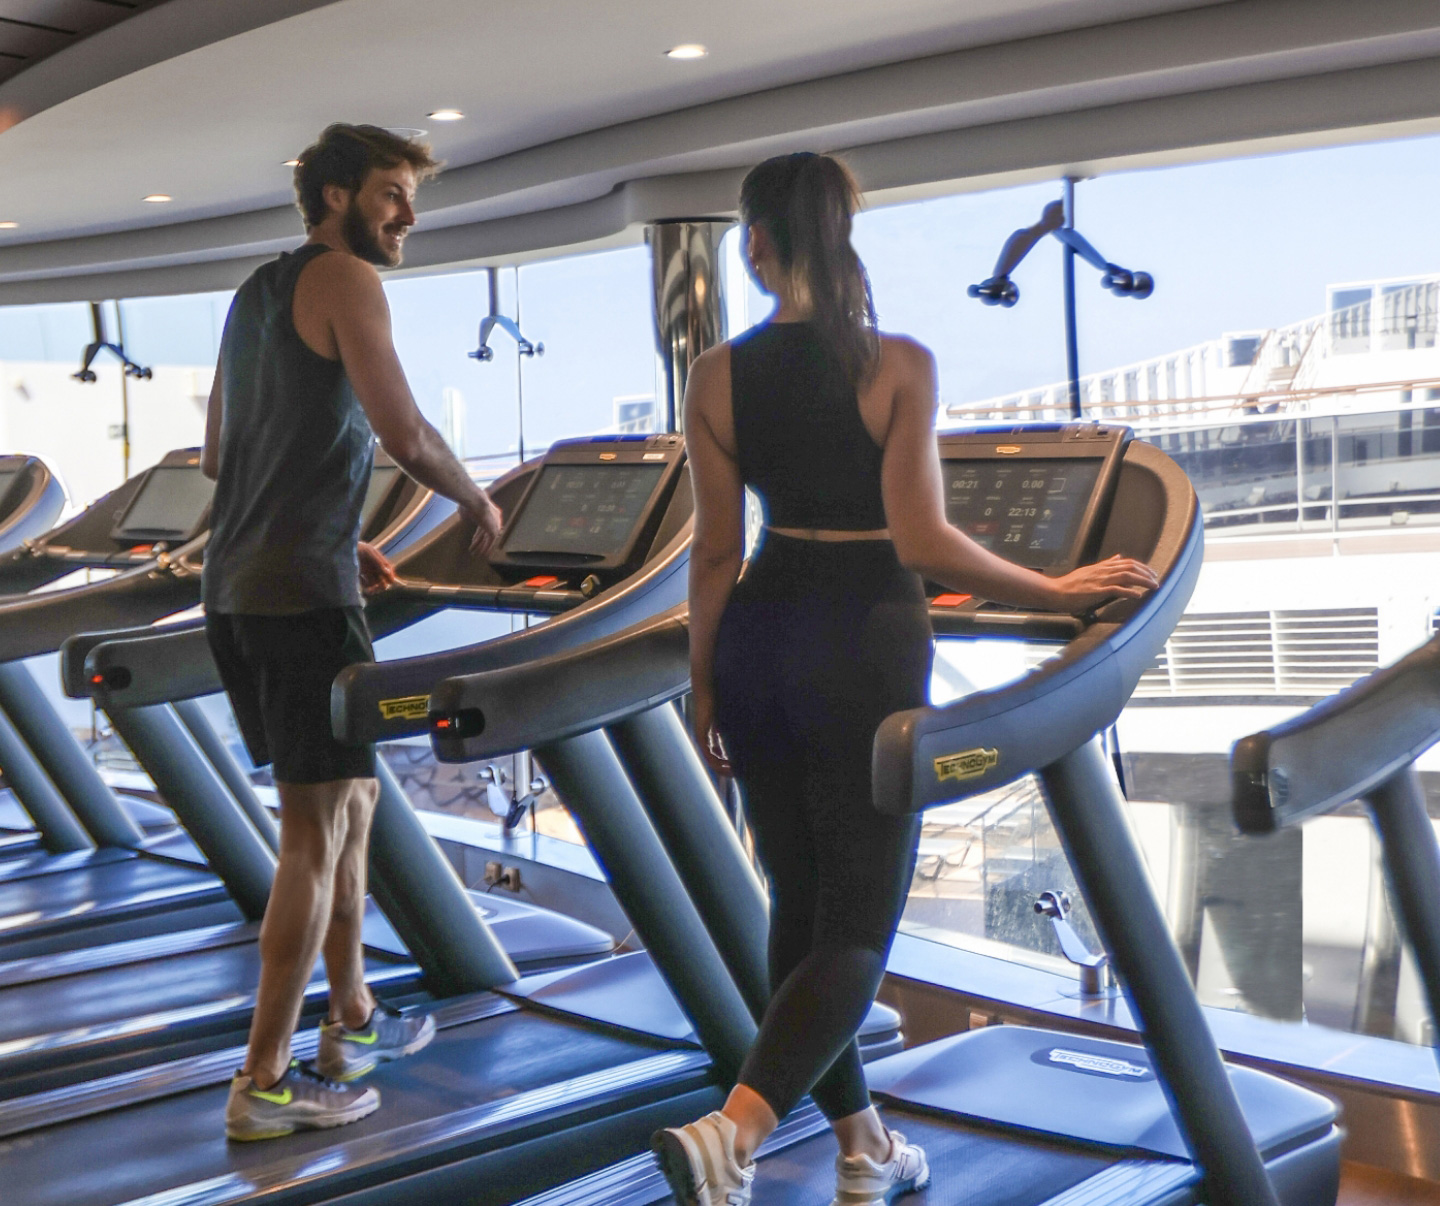 Enjoy a premium fitness experience on MSC Cruises as two individuals work out on treadmills in the well-appointed gym, offering scenic views of the ship and the expansive ocean beyond. 